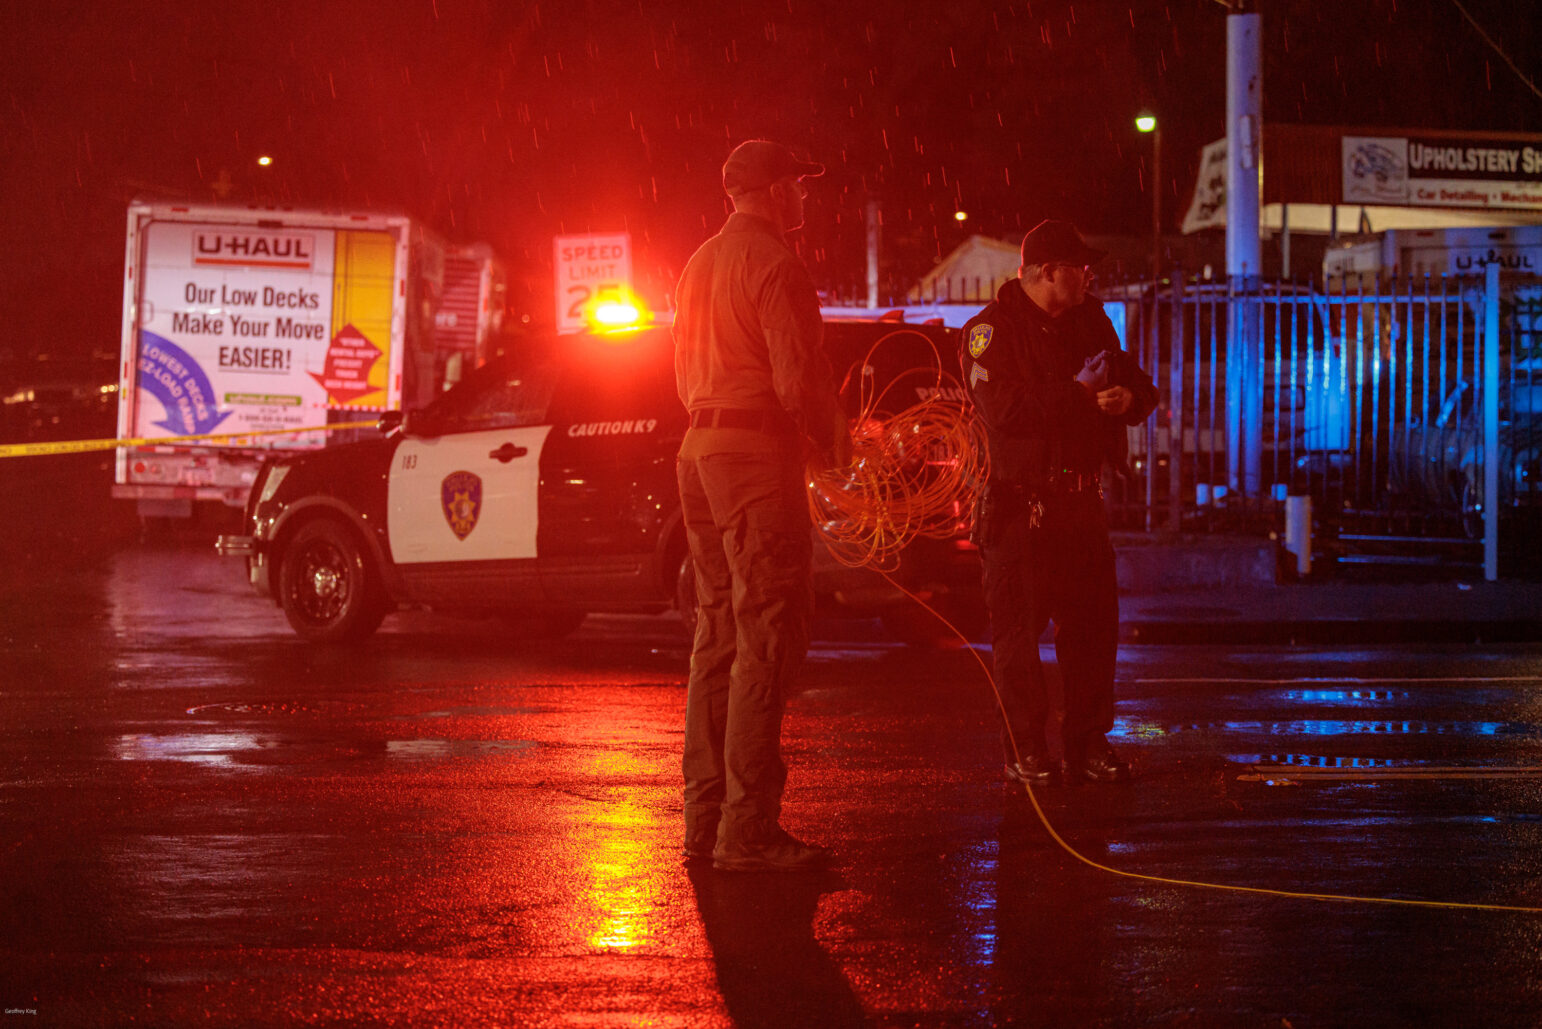 A night-time scene capturing two men on a rain-soaked street, illuminated by the red and blue lights of a police vehicle. A sheriff's deputy is holding what appears to be a coil of detonation cord, while the another man, a Vallejo police officer, observes the scene. The wet pavement reflects the colorful lights, adding to the dramatic atmosphere.